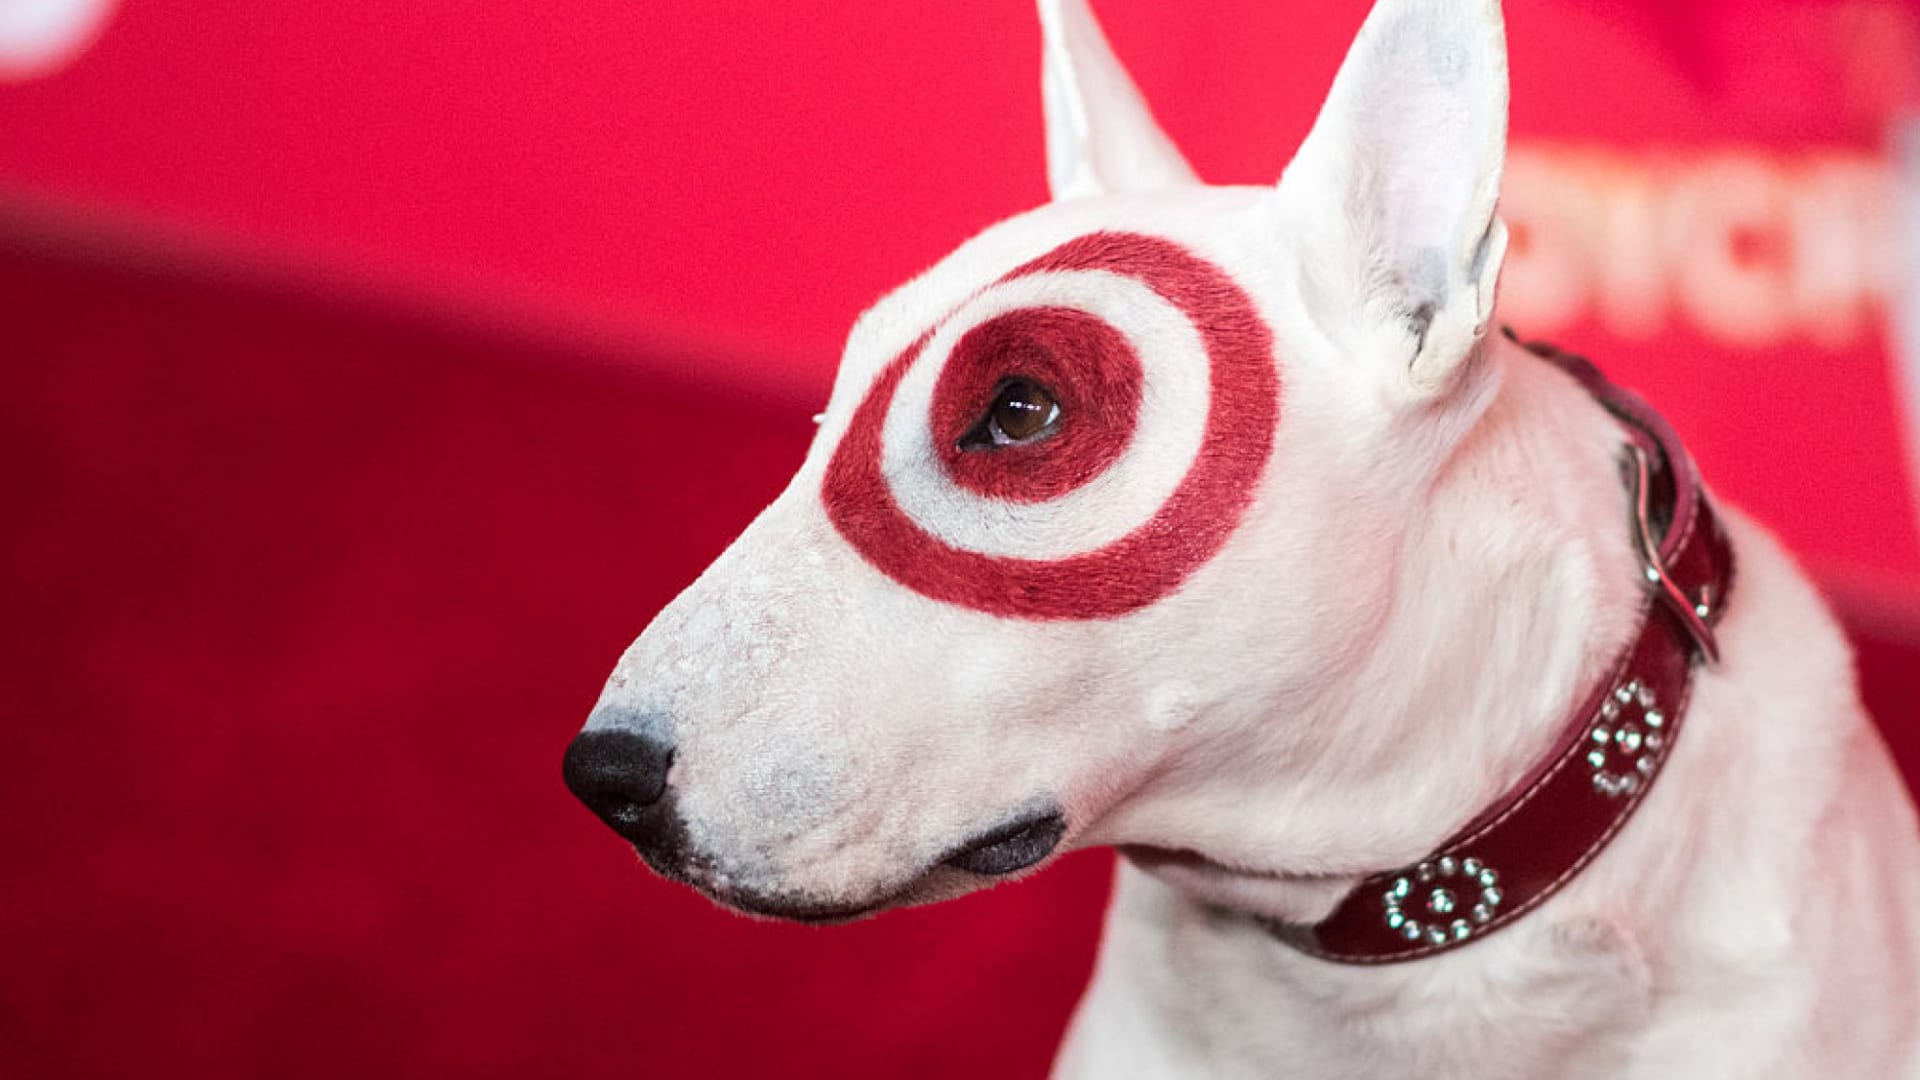 This 1 Number Explains Target's Strategy to Beat Amazon. It's a Stroke of Genius